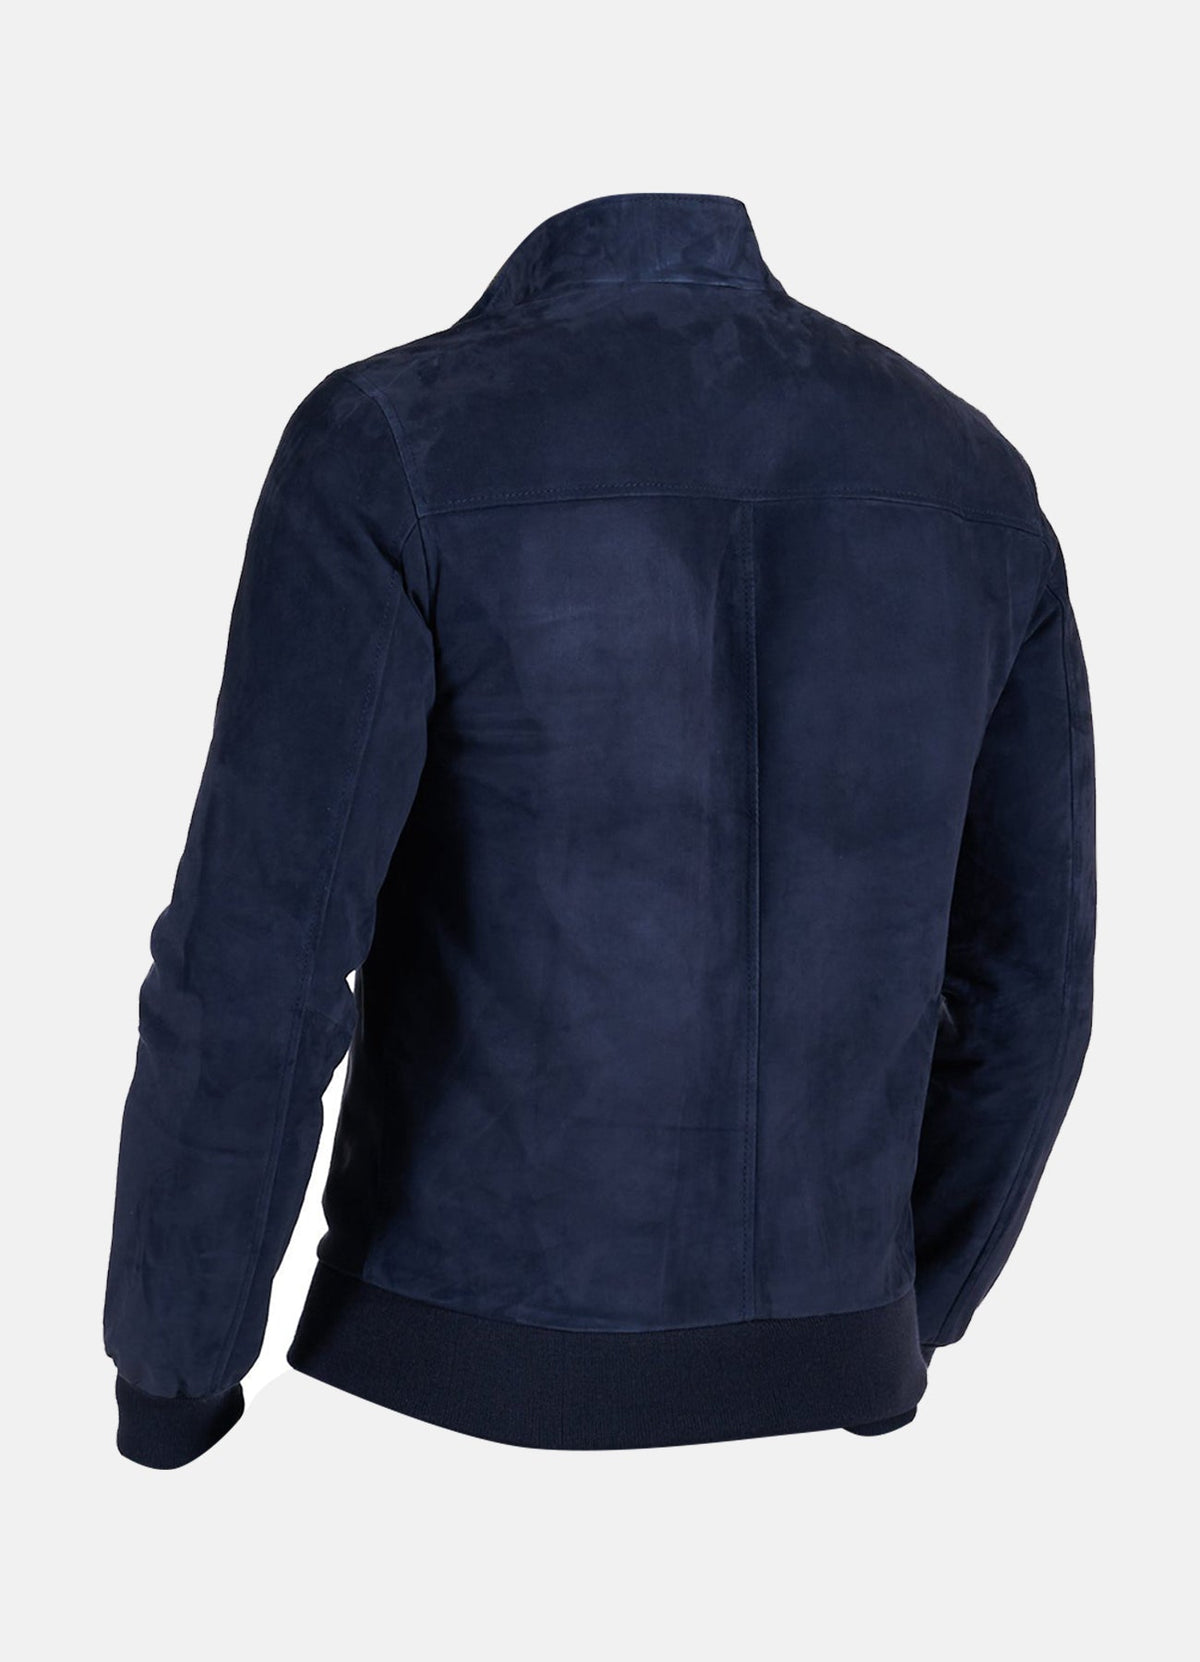 Mens Midnight Blue Suede Leather Jacket